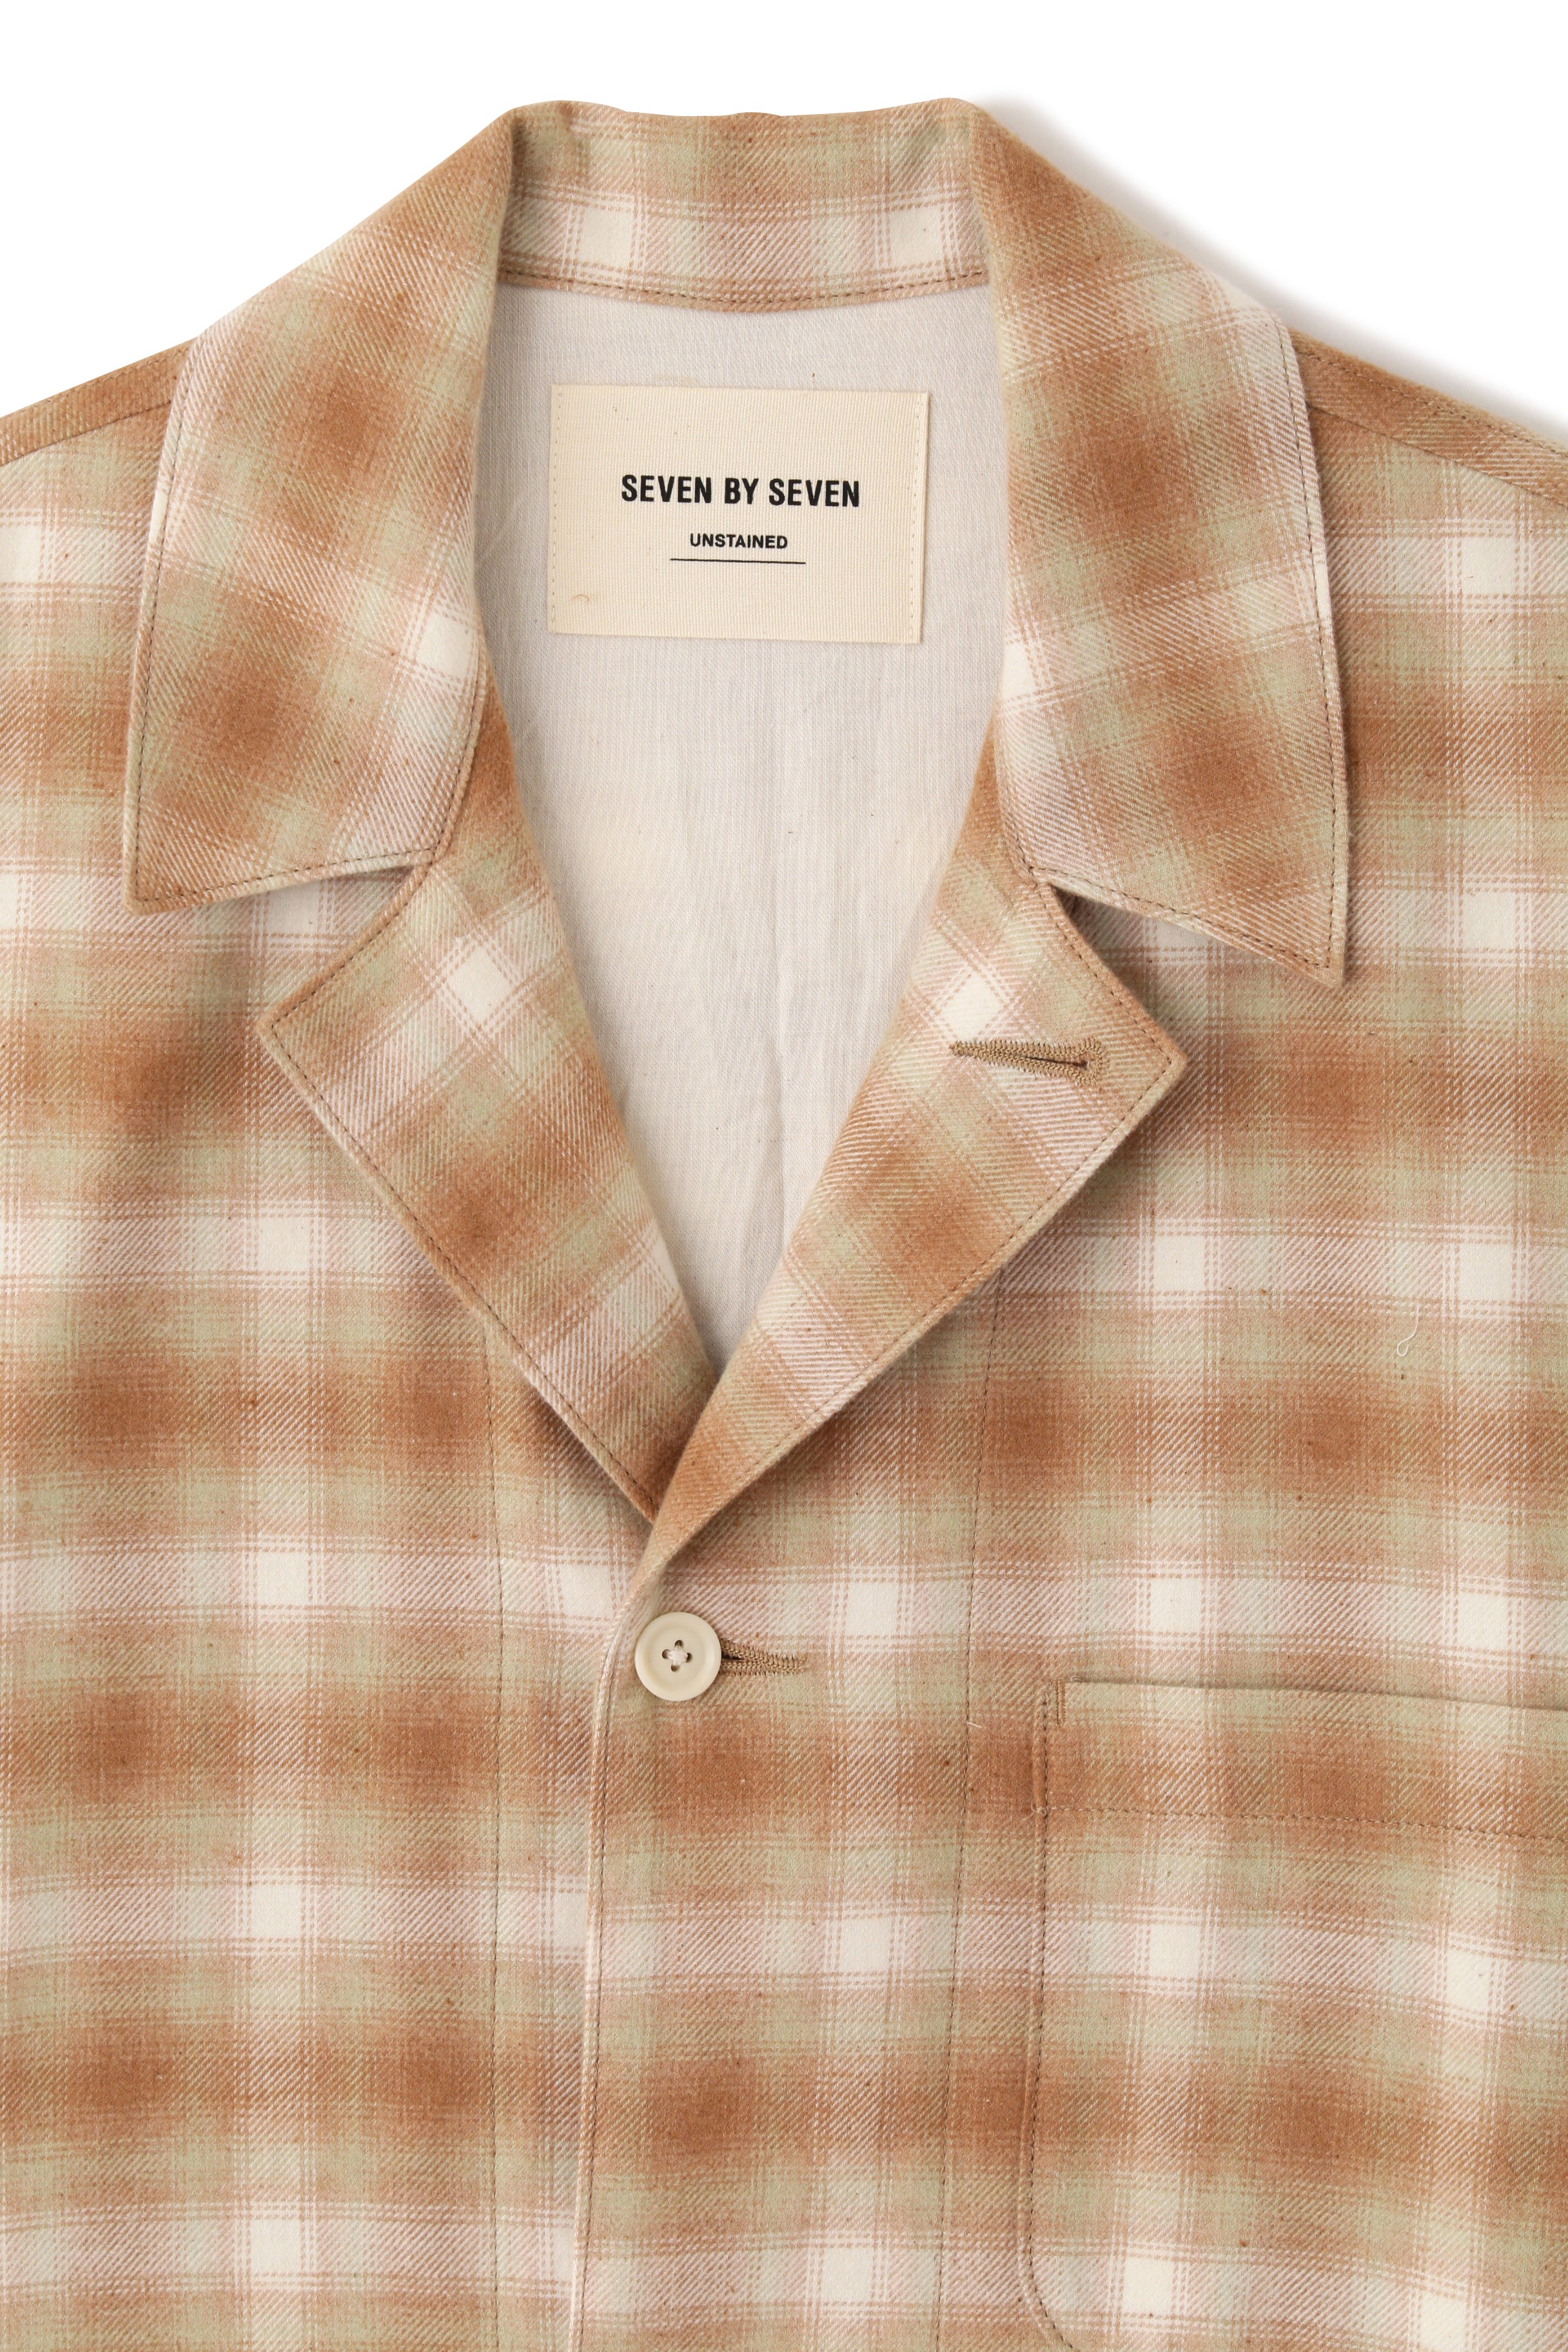 OMBRE CHECK COVERALL JACKET -UNSTAINED ORGANIC COTTON-